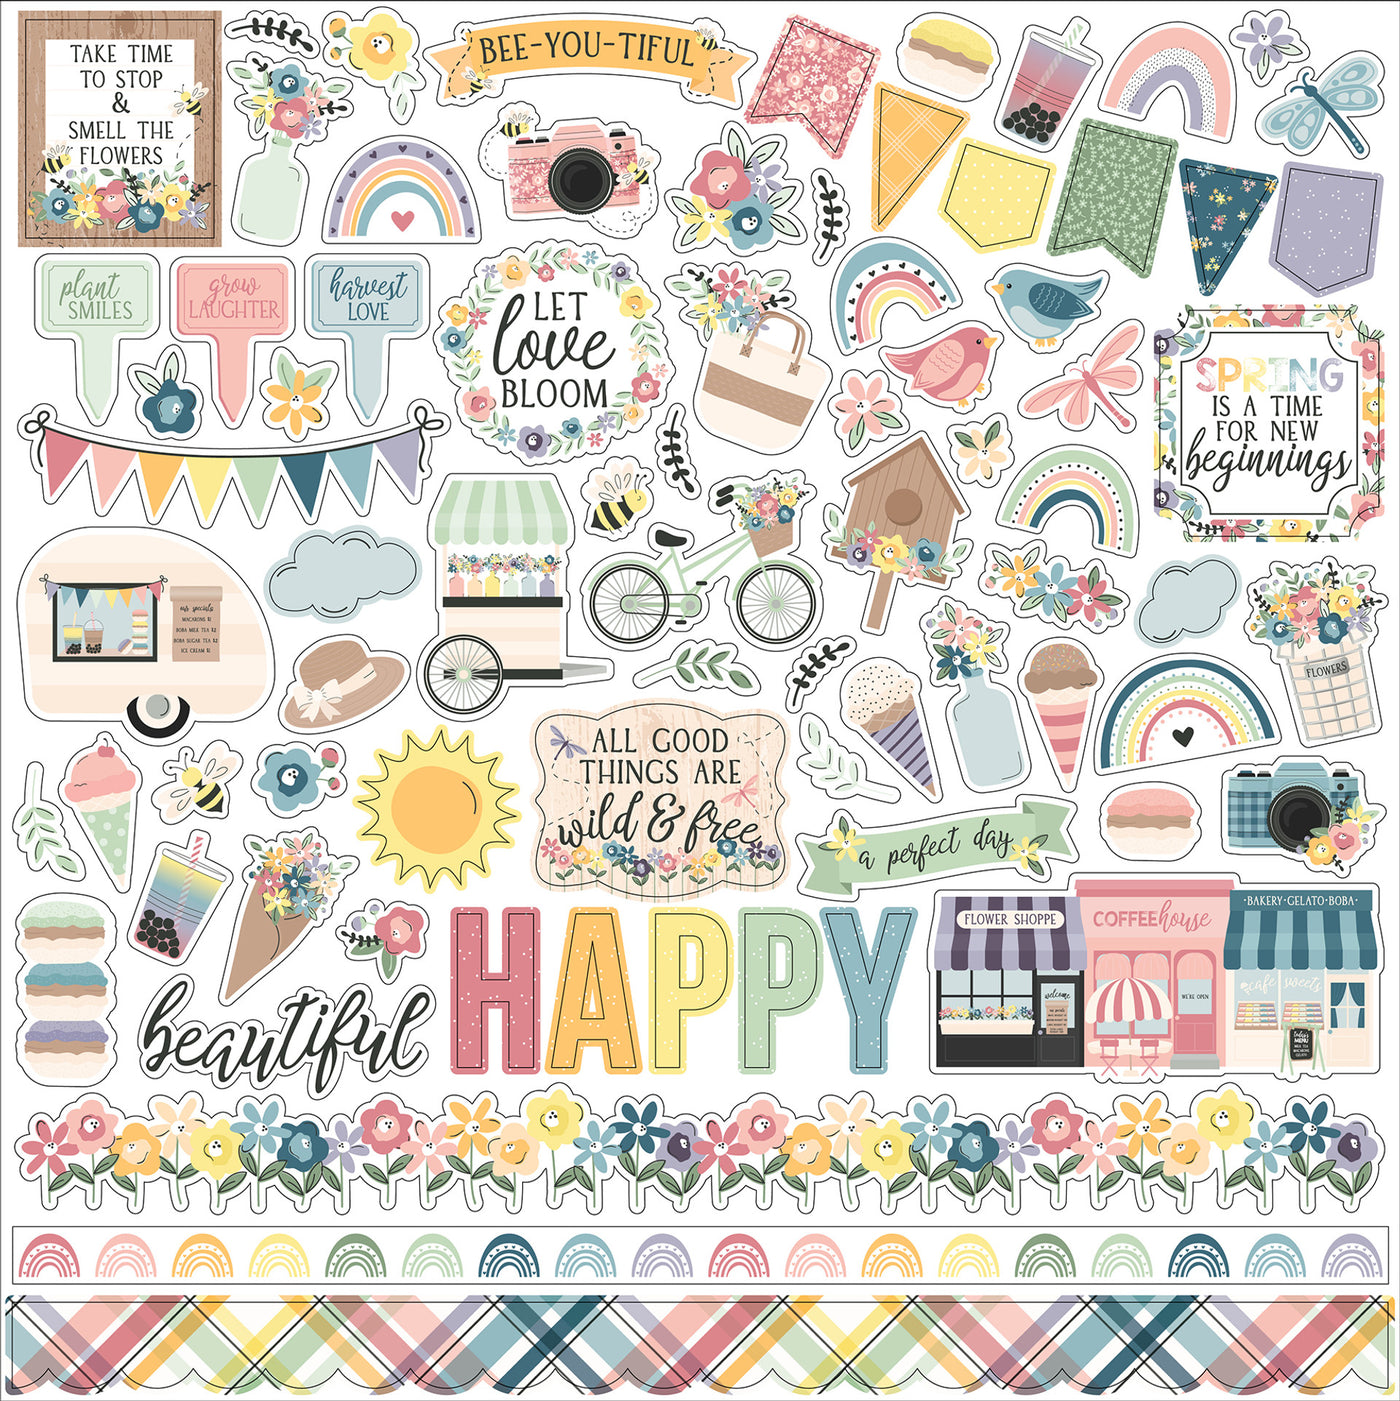 New Day Elements 12" x 12" Cardstock Stickers from the New Day Collection by Echo Park. These stickers include a camping trailer, flowers, a bicycle, phrases, borders, and more!